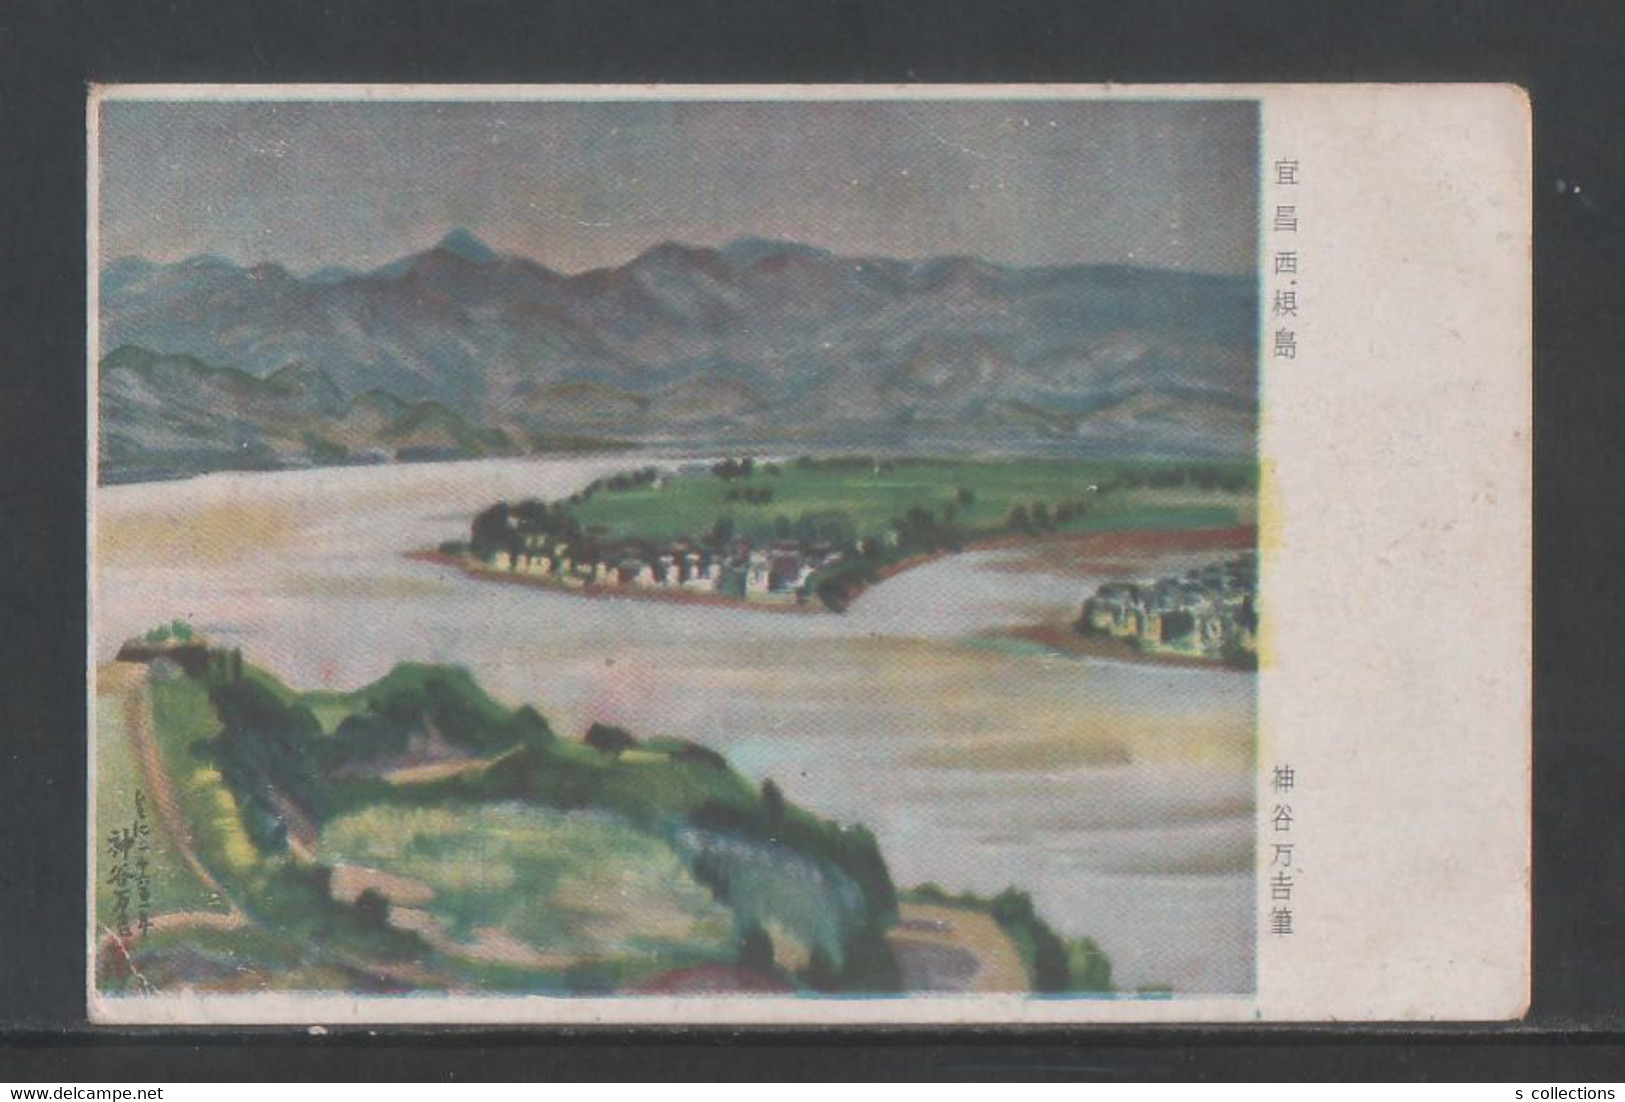 JAPAN WWII Military Yichang Xiba Island Picture Postcard Central China 22th Division CHINE WW2 JAPON GIAPPONE - 1943-45 Shanghai & Nankin